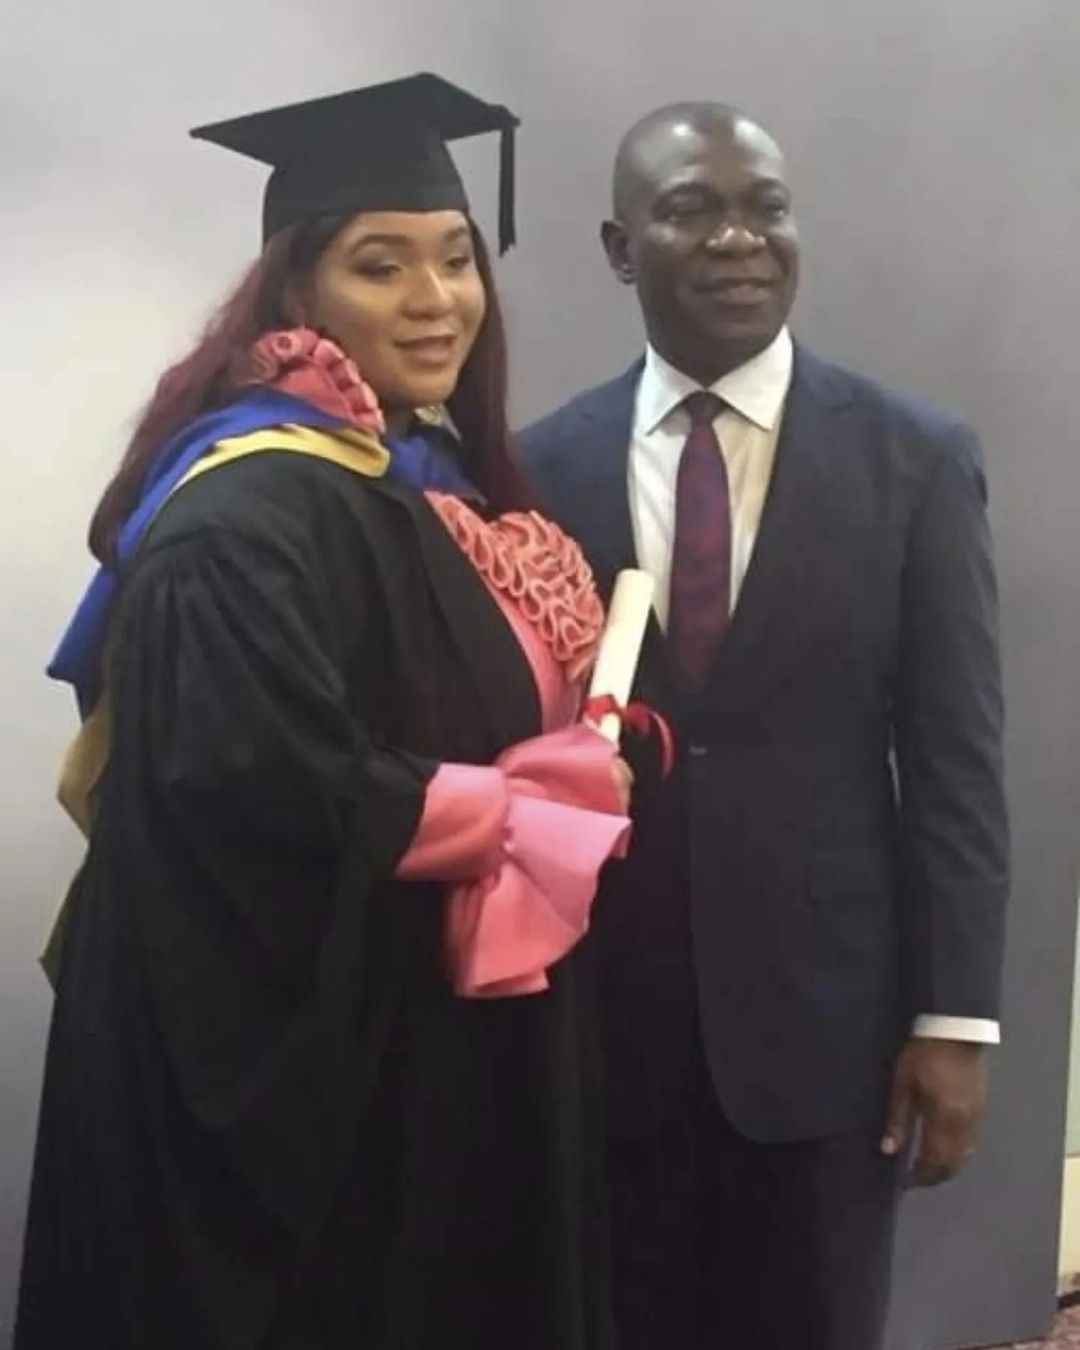 “Someone should donate a kidney for me in the name of God” – Ike Ekweremadu’s daughter pleads to Nigerians